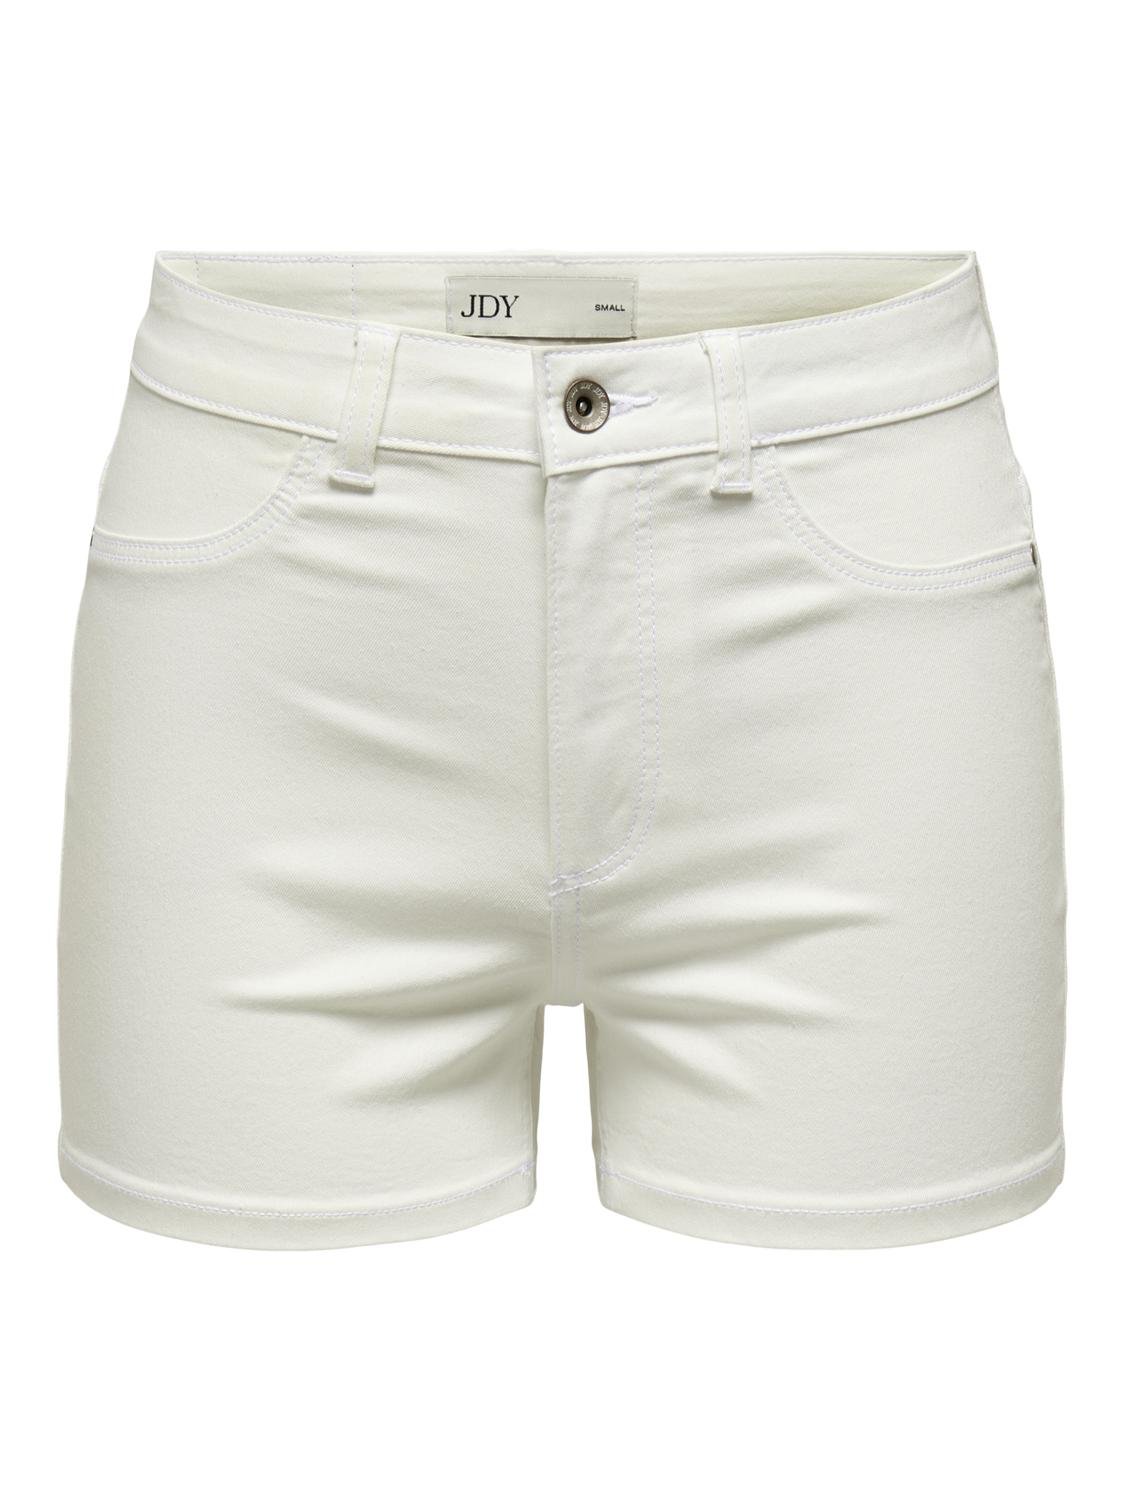 ONLY Skinny Fit High waist Shorts -White - 15281790